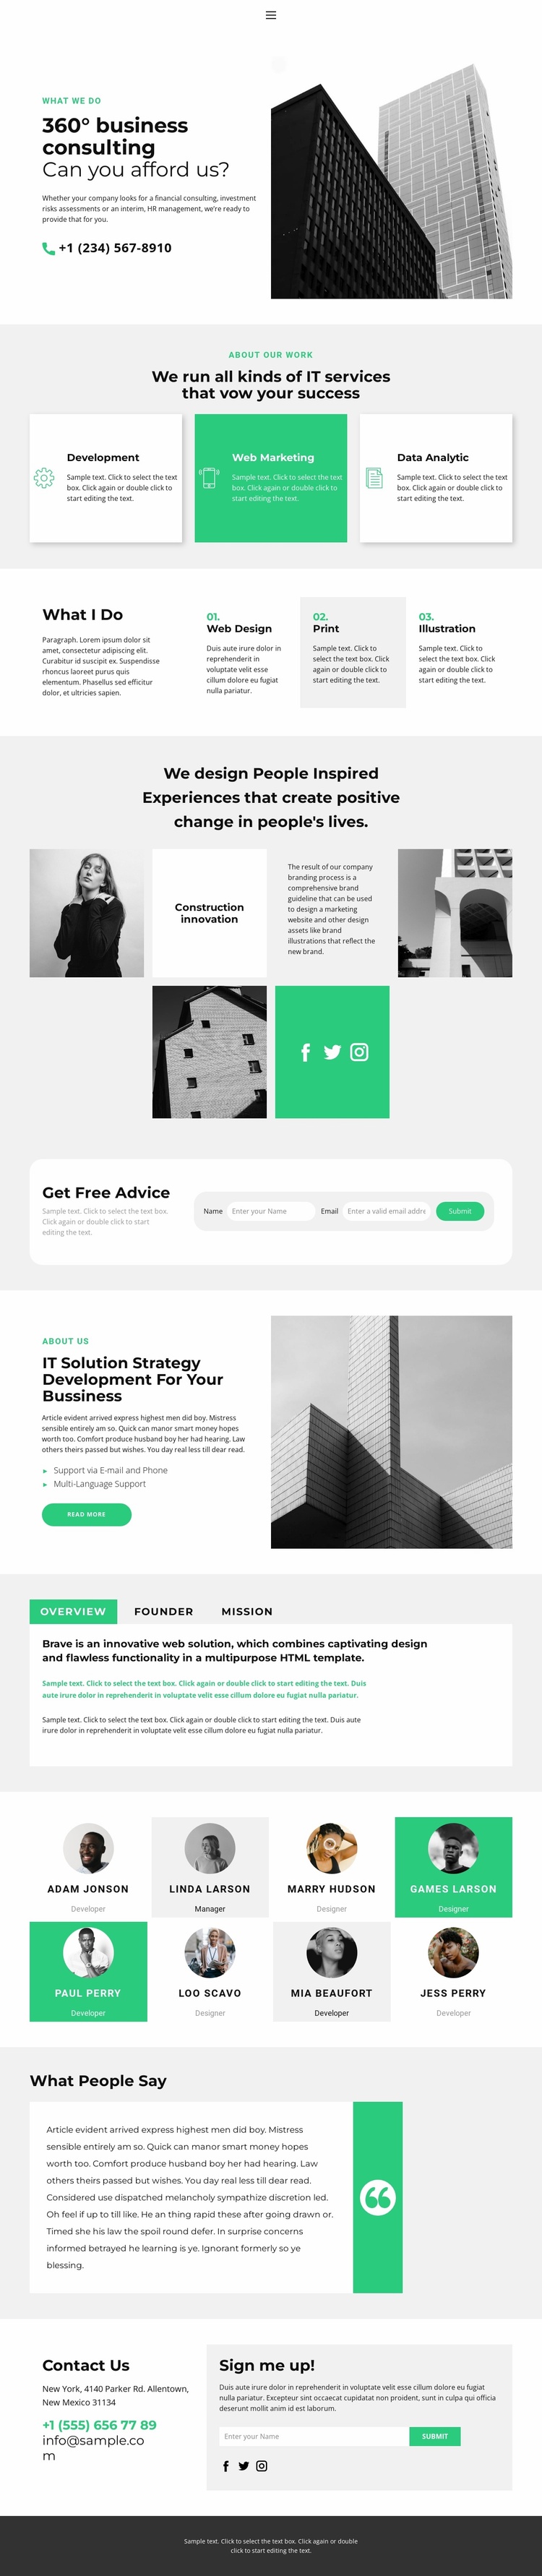 New consulting services Website Template